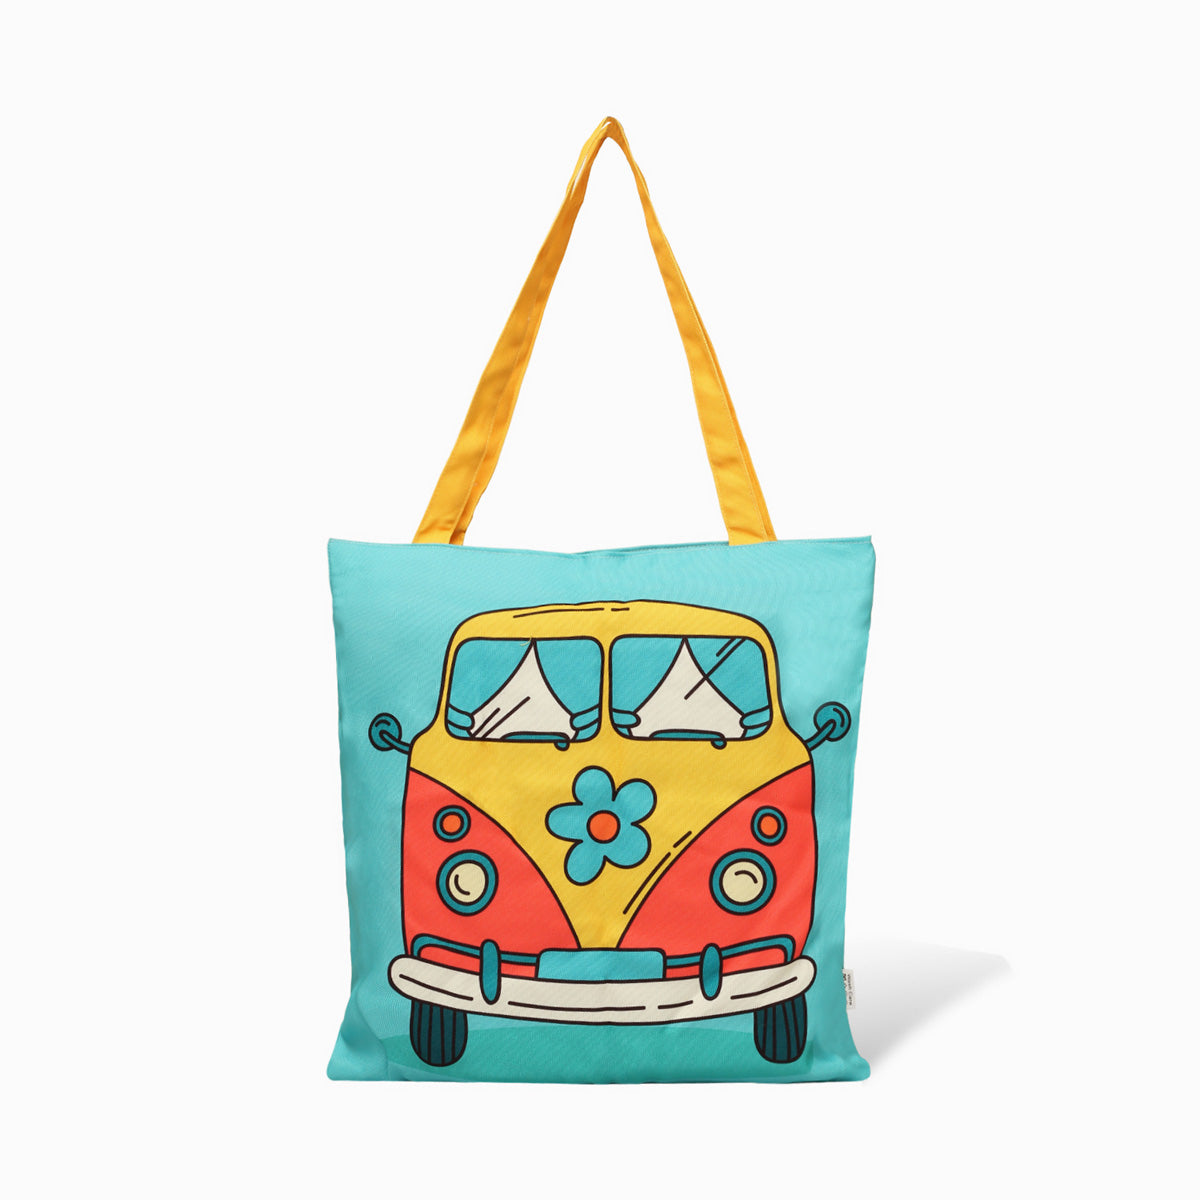 Fun tote bag with whimsical van illustration, great for adding a playful touch to your look.